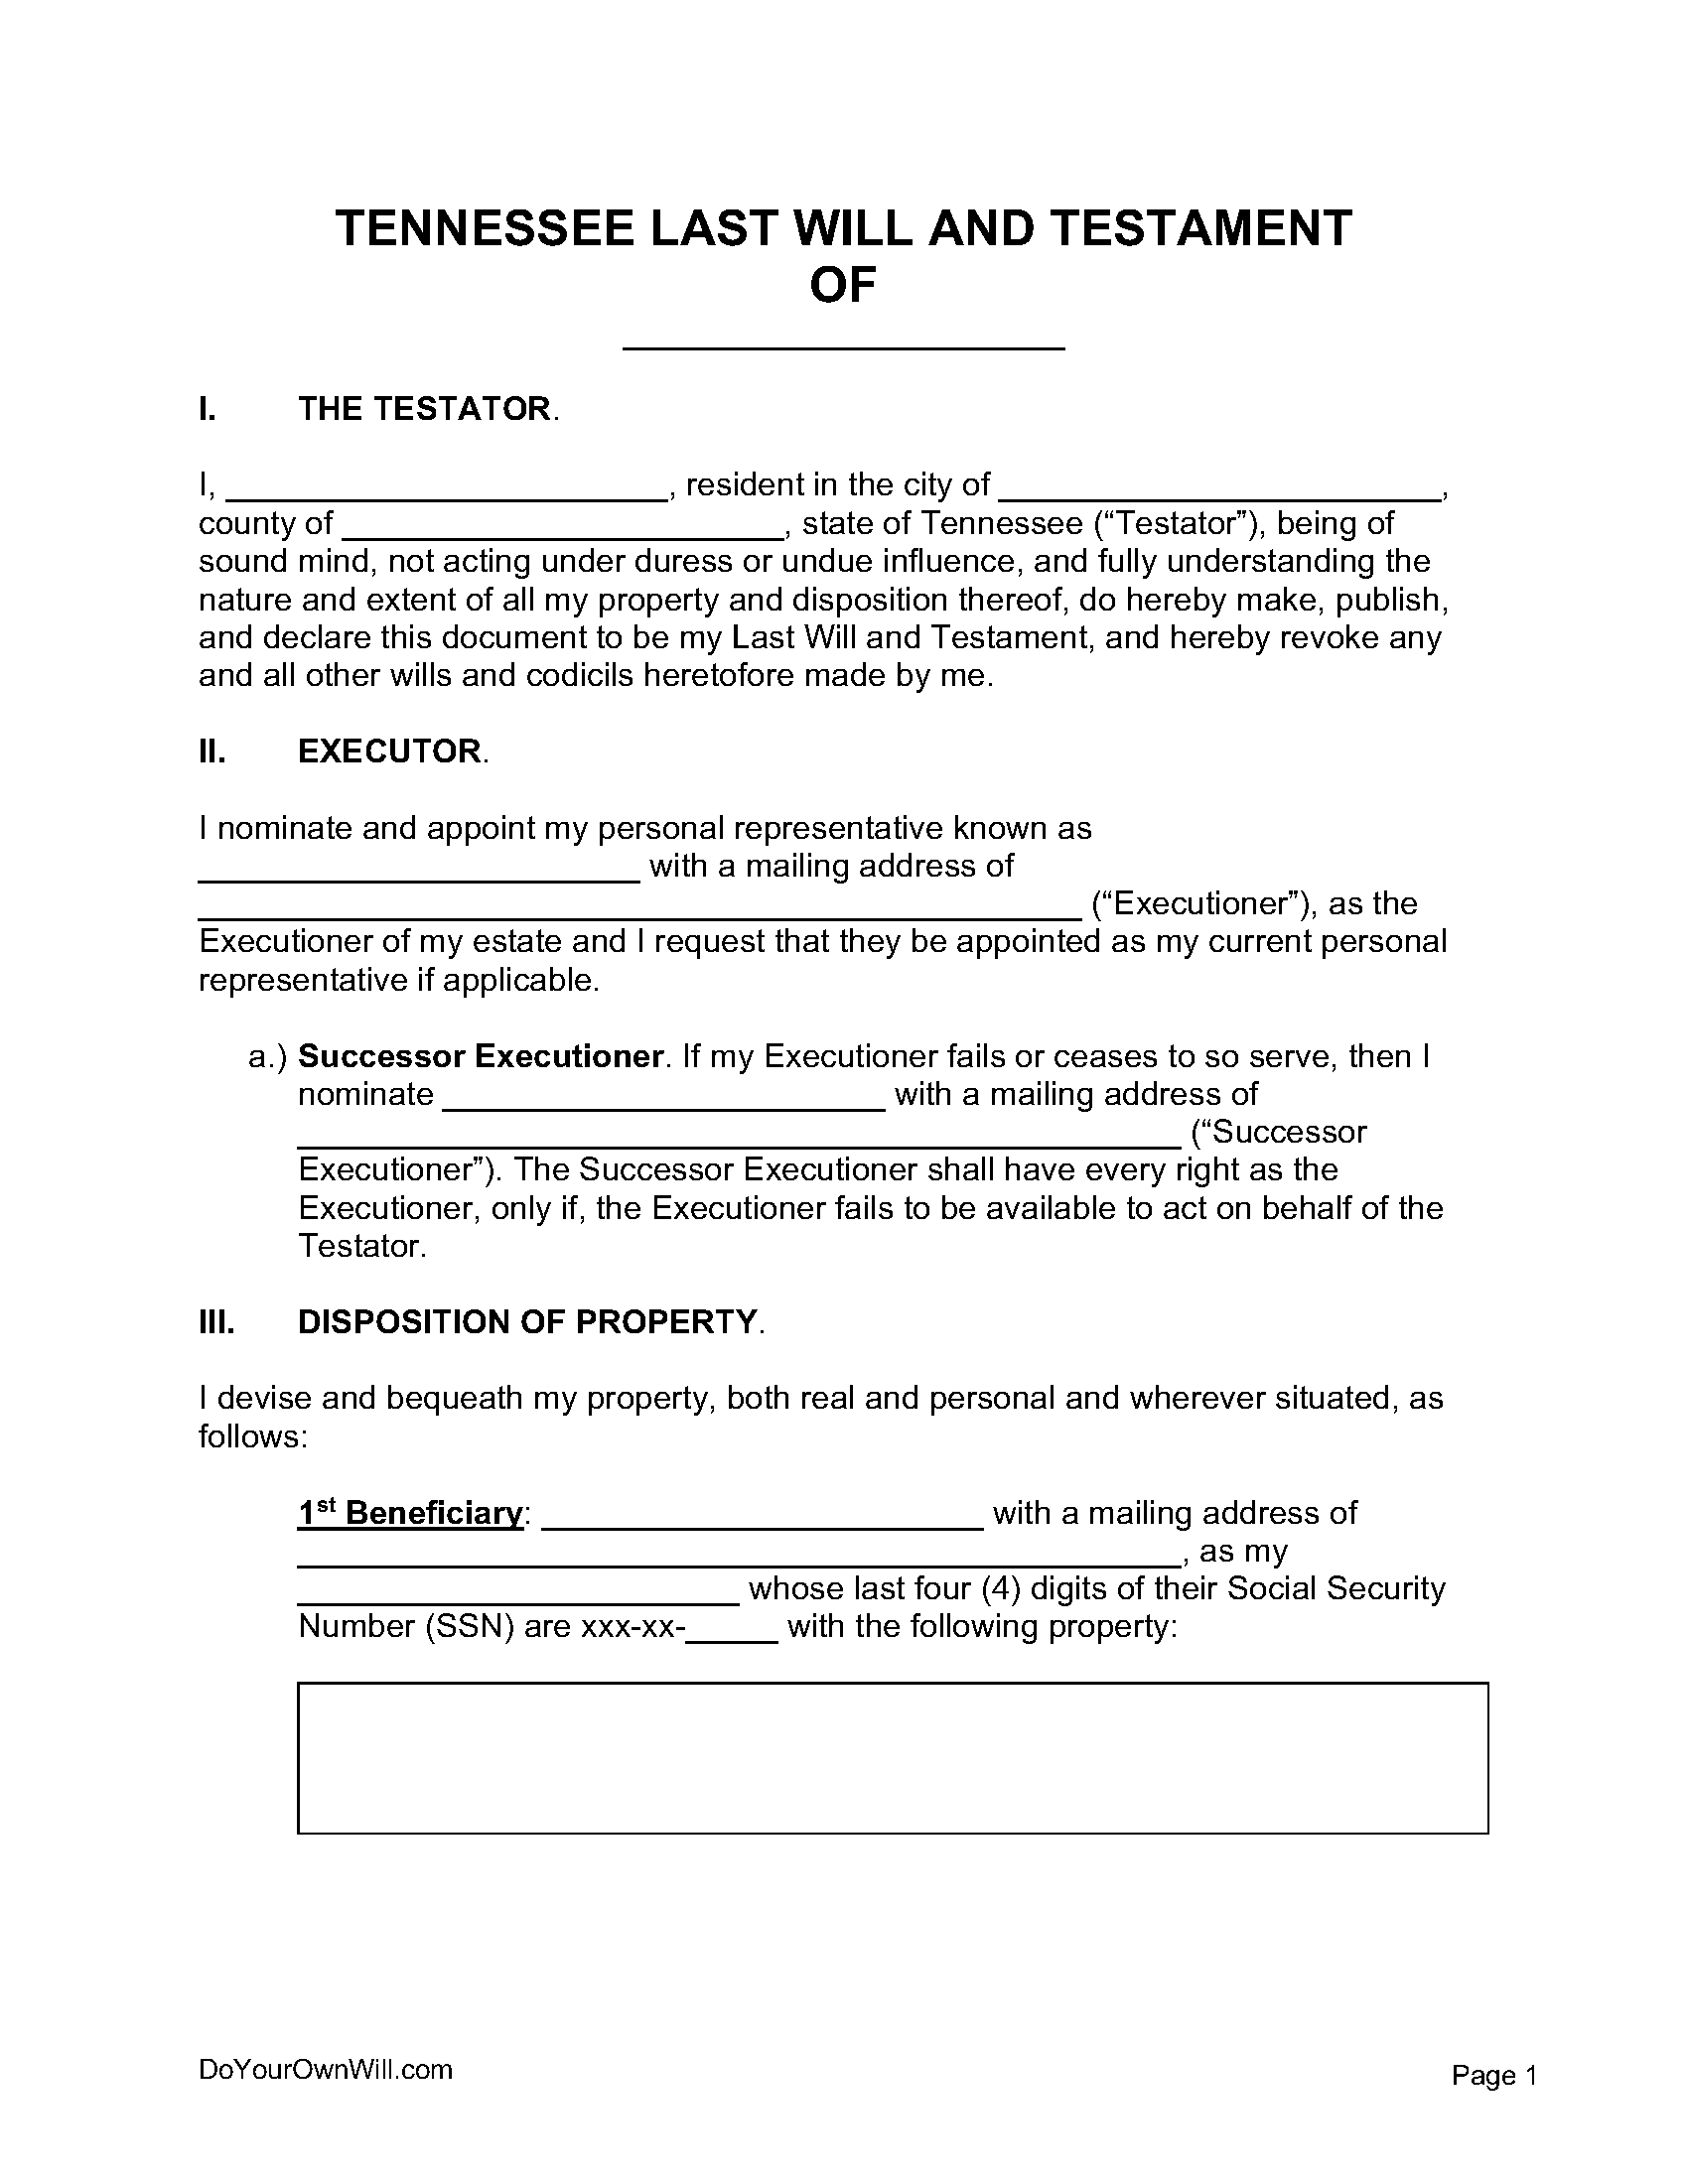 Free Tennessee Last Will and Testament Form PDF WORD 1 ODT